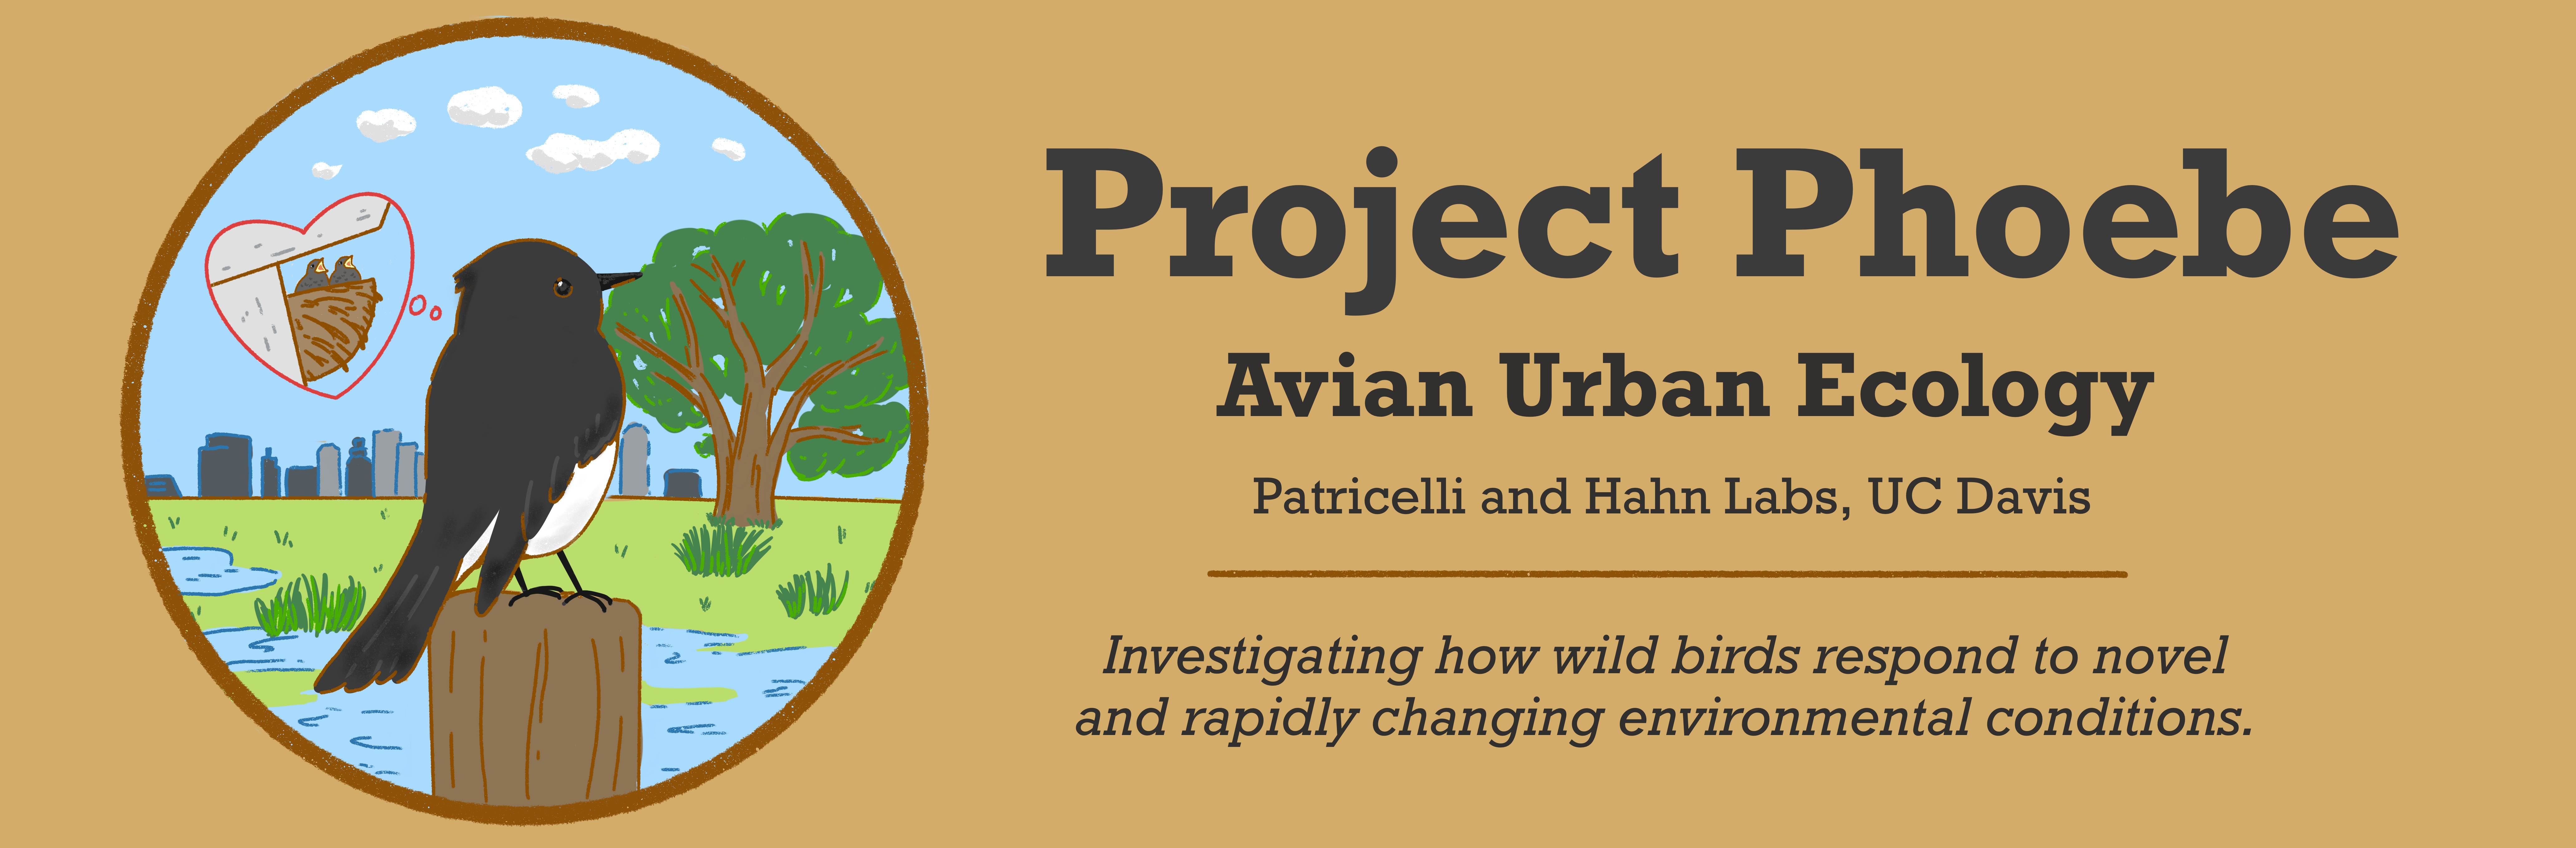 A tan rectangle with a circular logo on the left and text on the right. The logo depicts a black phoebe perched on a post with a river and city skyline in the background. The text reads: "Project Phoebe; Avian Urban Ecology: Investigating how wild birds respond to novel and rapidly changing environments."